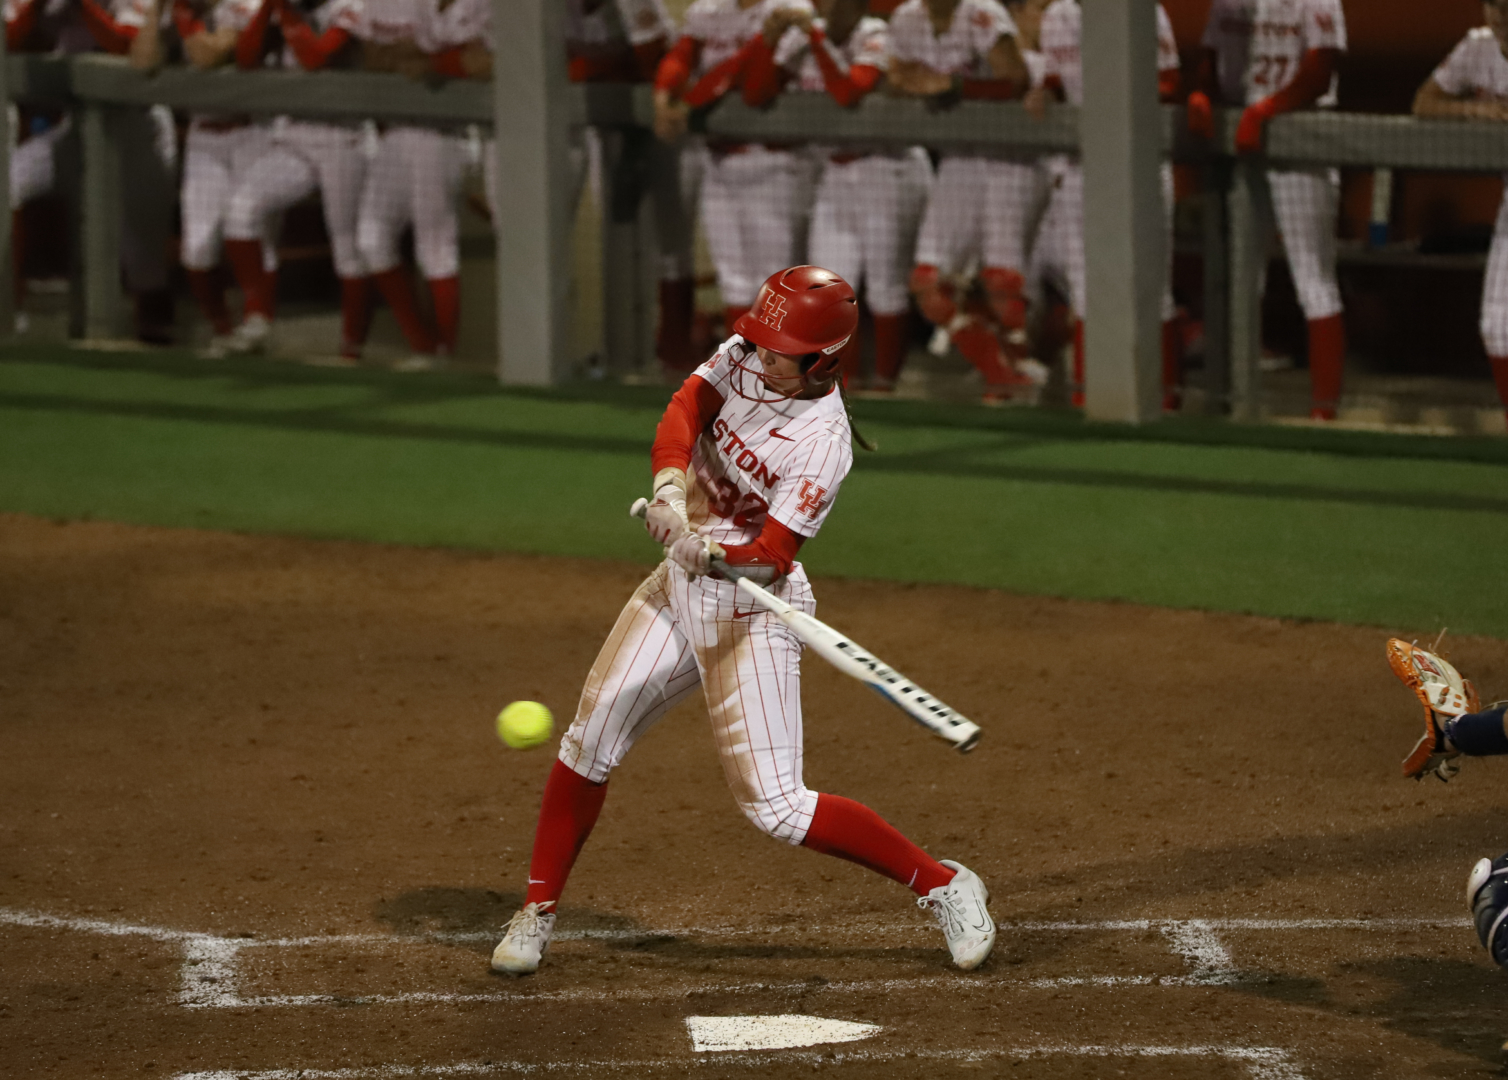 UH softball dropped three out of four games over the weekend at the Hall of Fame Classic in Oklahoma City. | Sean Thomas/The Cougar